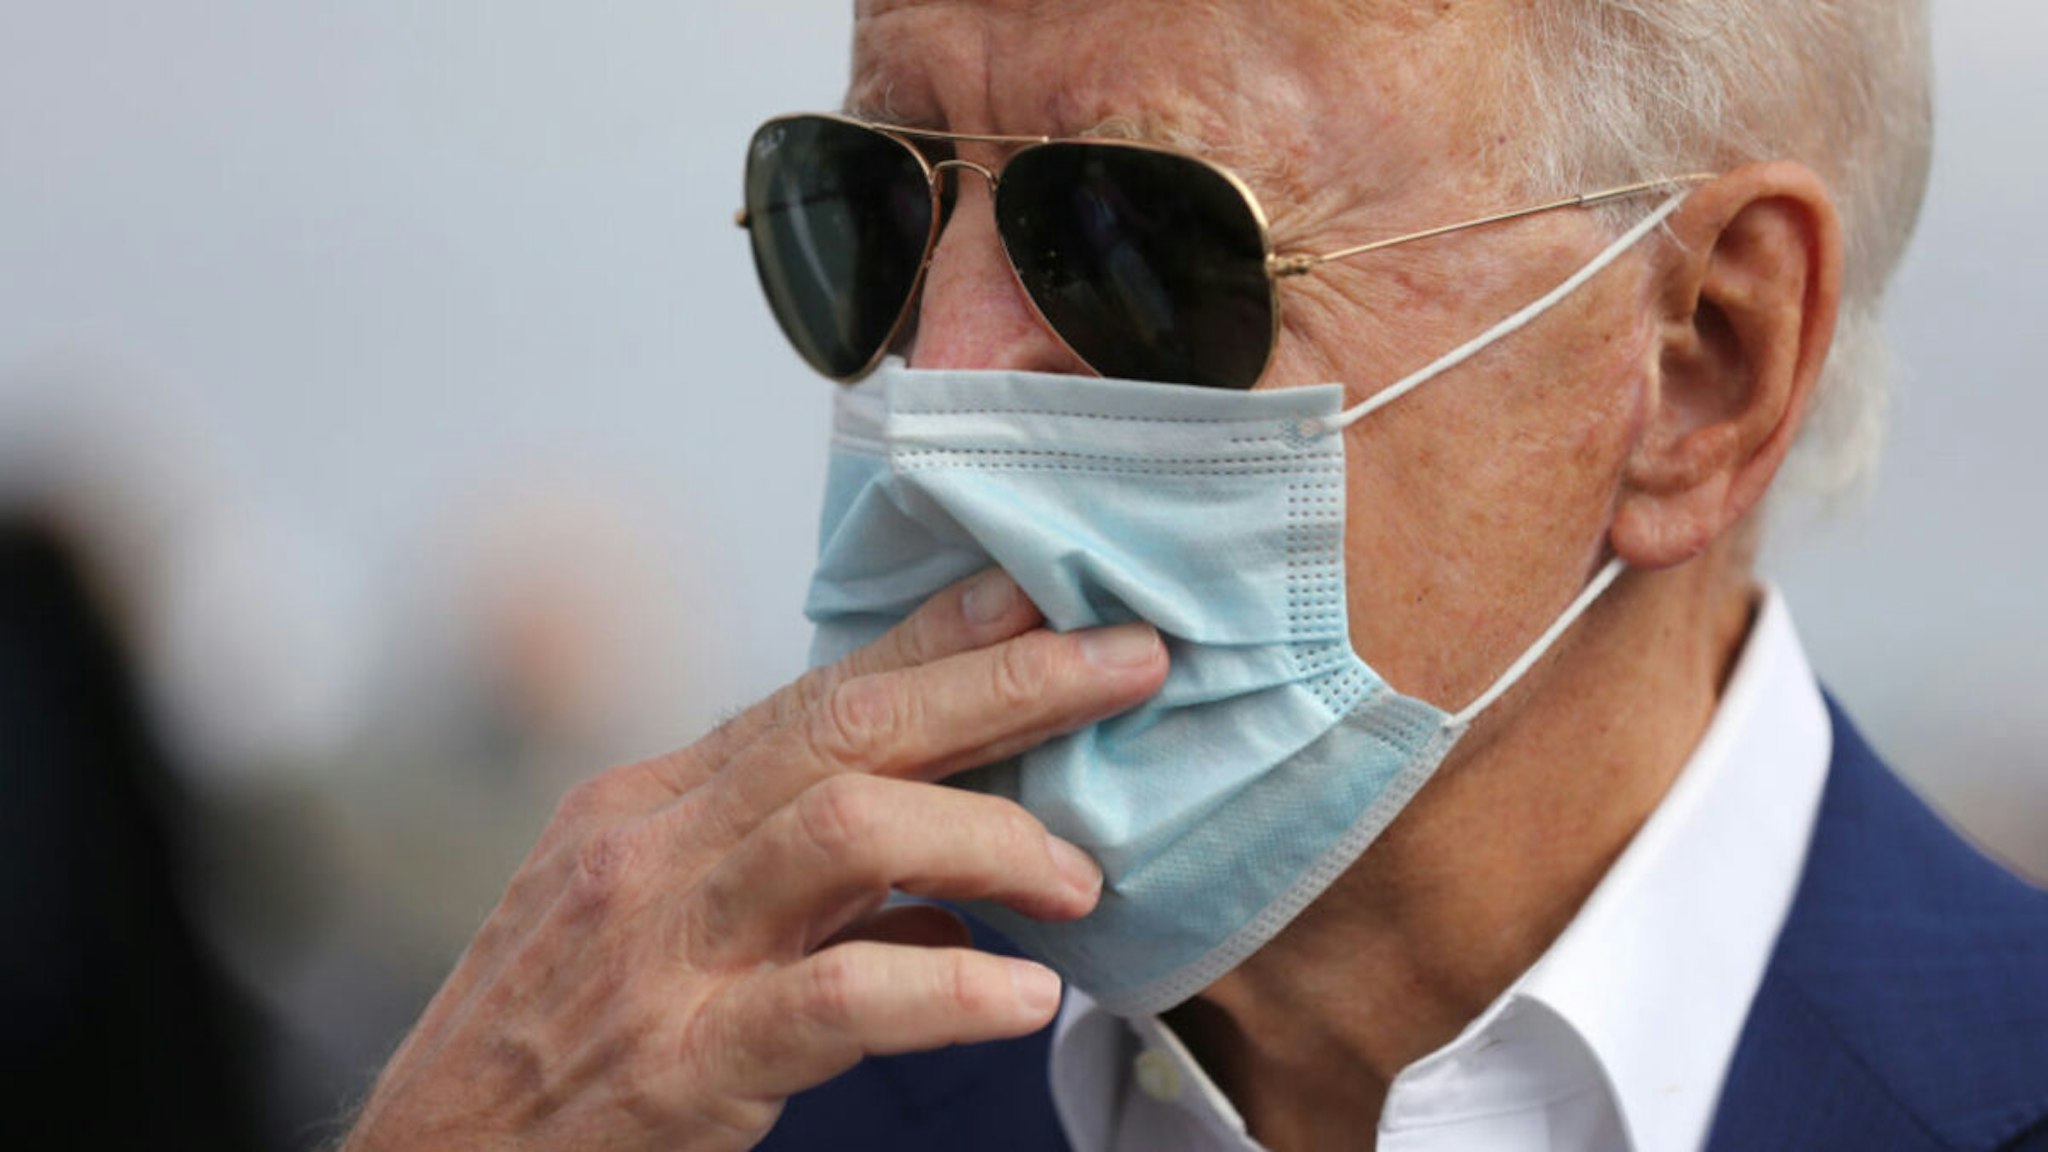 Wearing a face mask to reduce the risk posed by the coronavirus, Democratic presidential nominee Joe Biden speaks briefly with reporters before boarding a flight to Florida at New Castle County Airport October 13, 2020 in New Castle, Delaware.